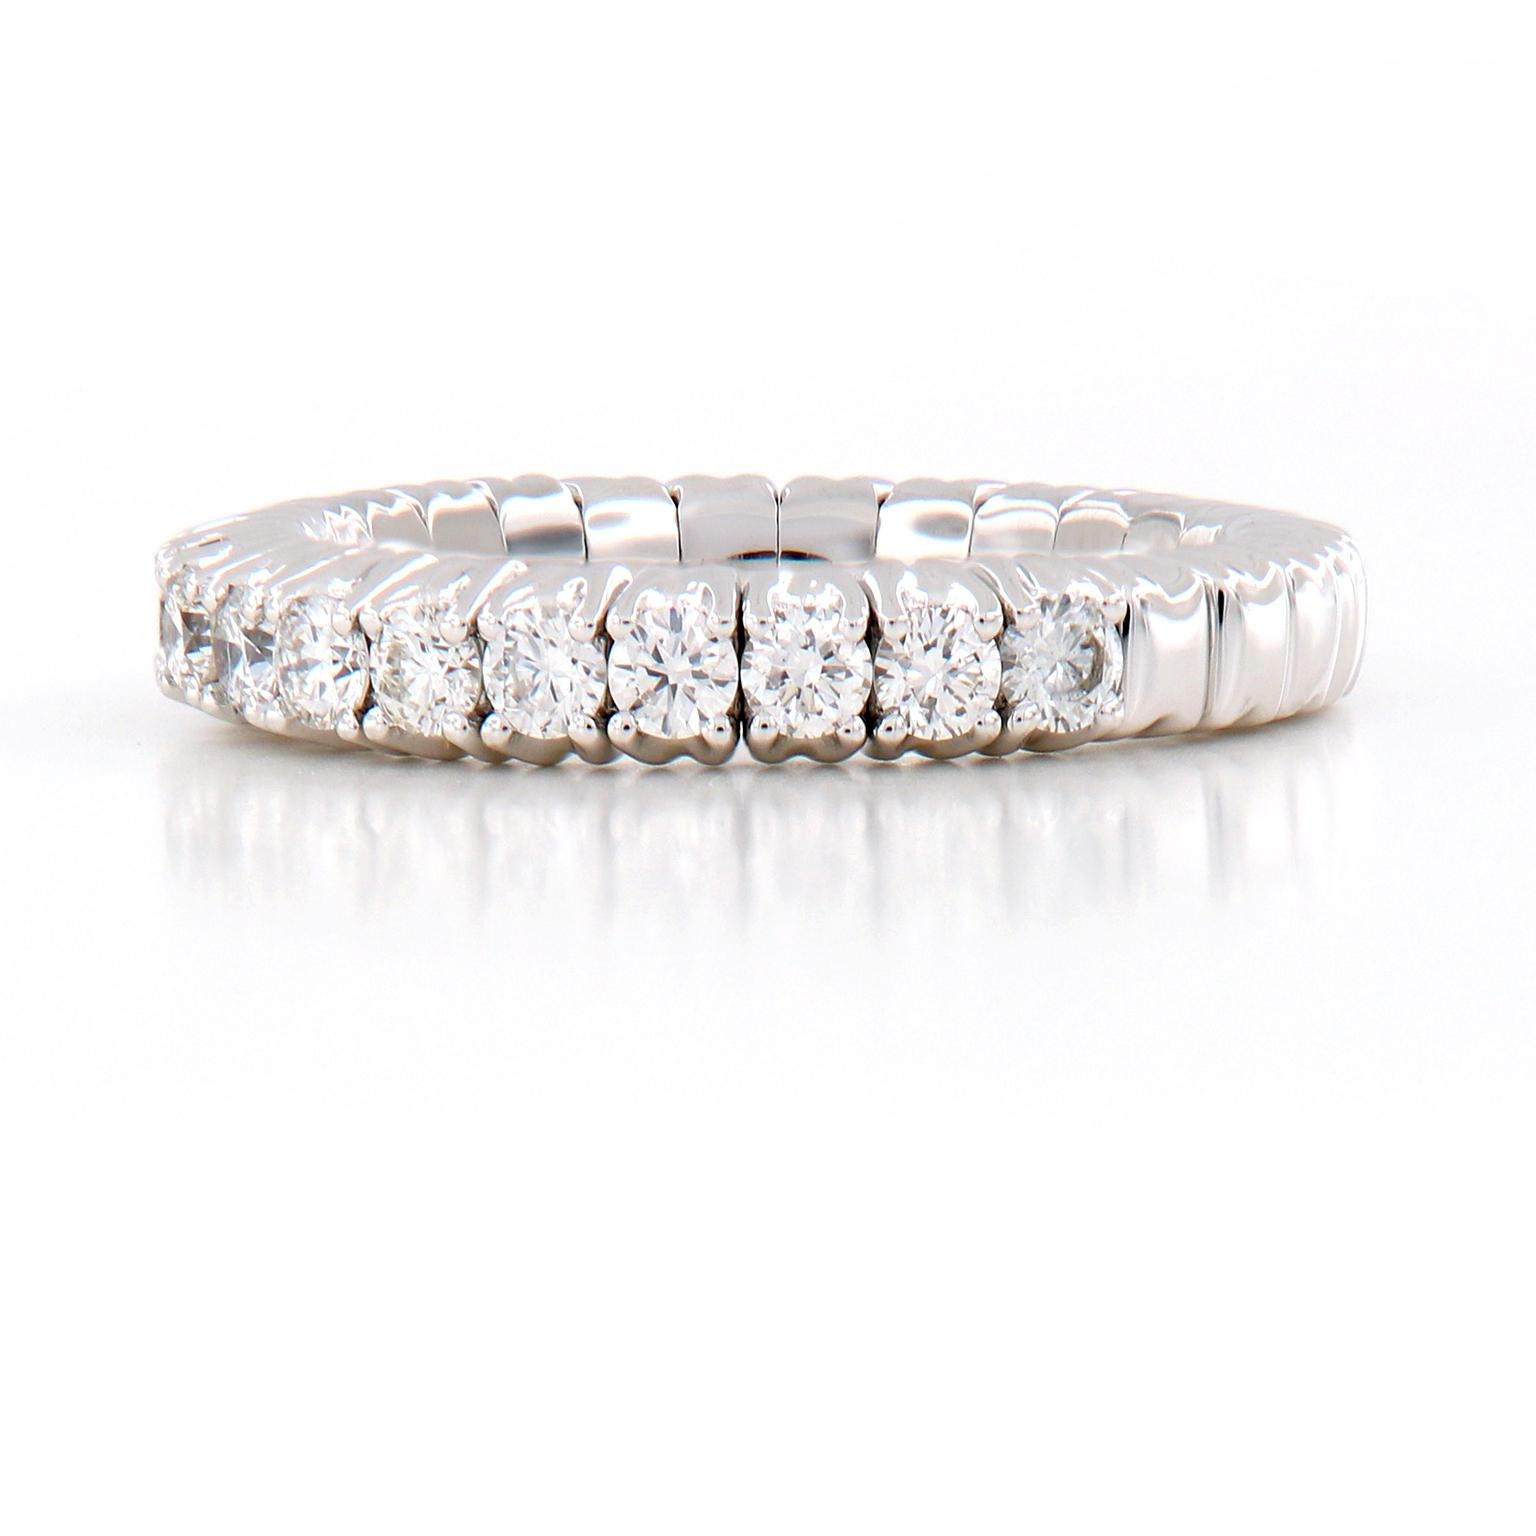 This beautiful stretchable diamond band ring is designed for comfort and perfectly fits one’s finger. It even fits those with larger knuckles! The ring is crafted in 18k white gold and feature 15 round brilliant cut diamonds. The band can stretch up